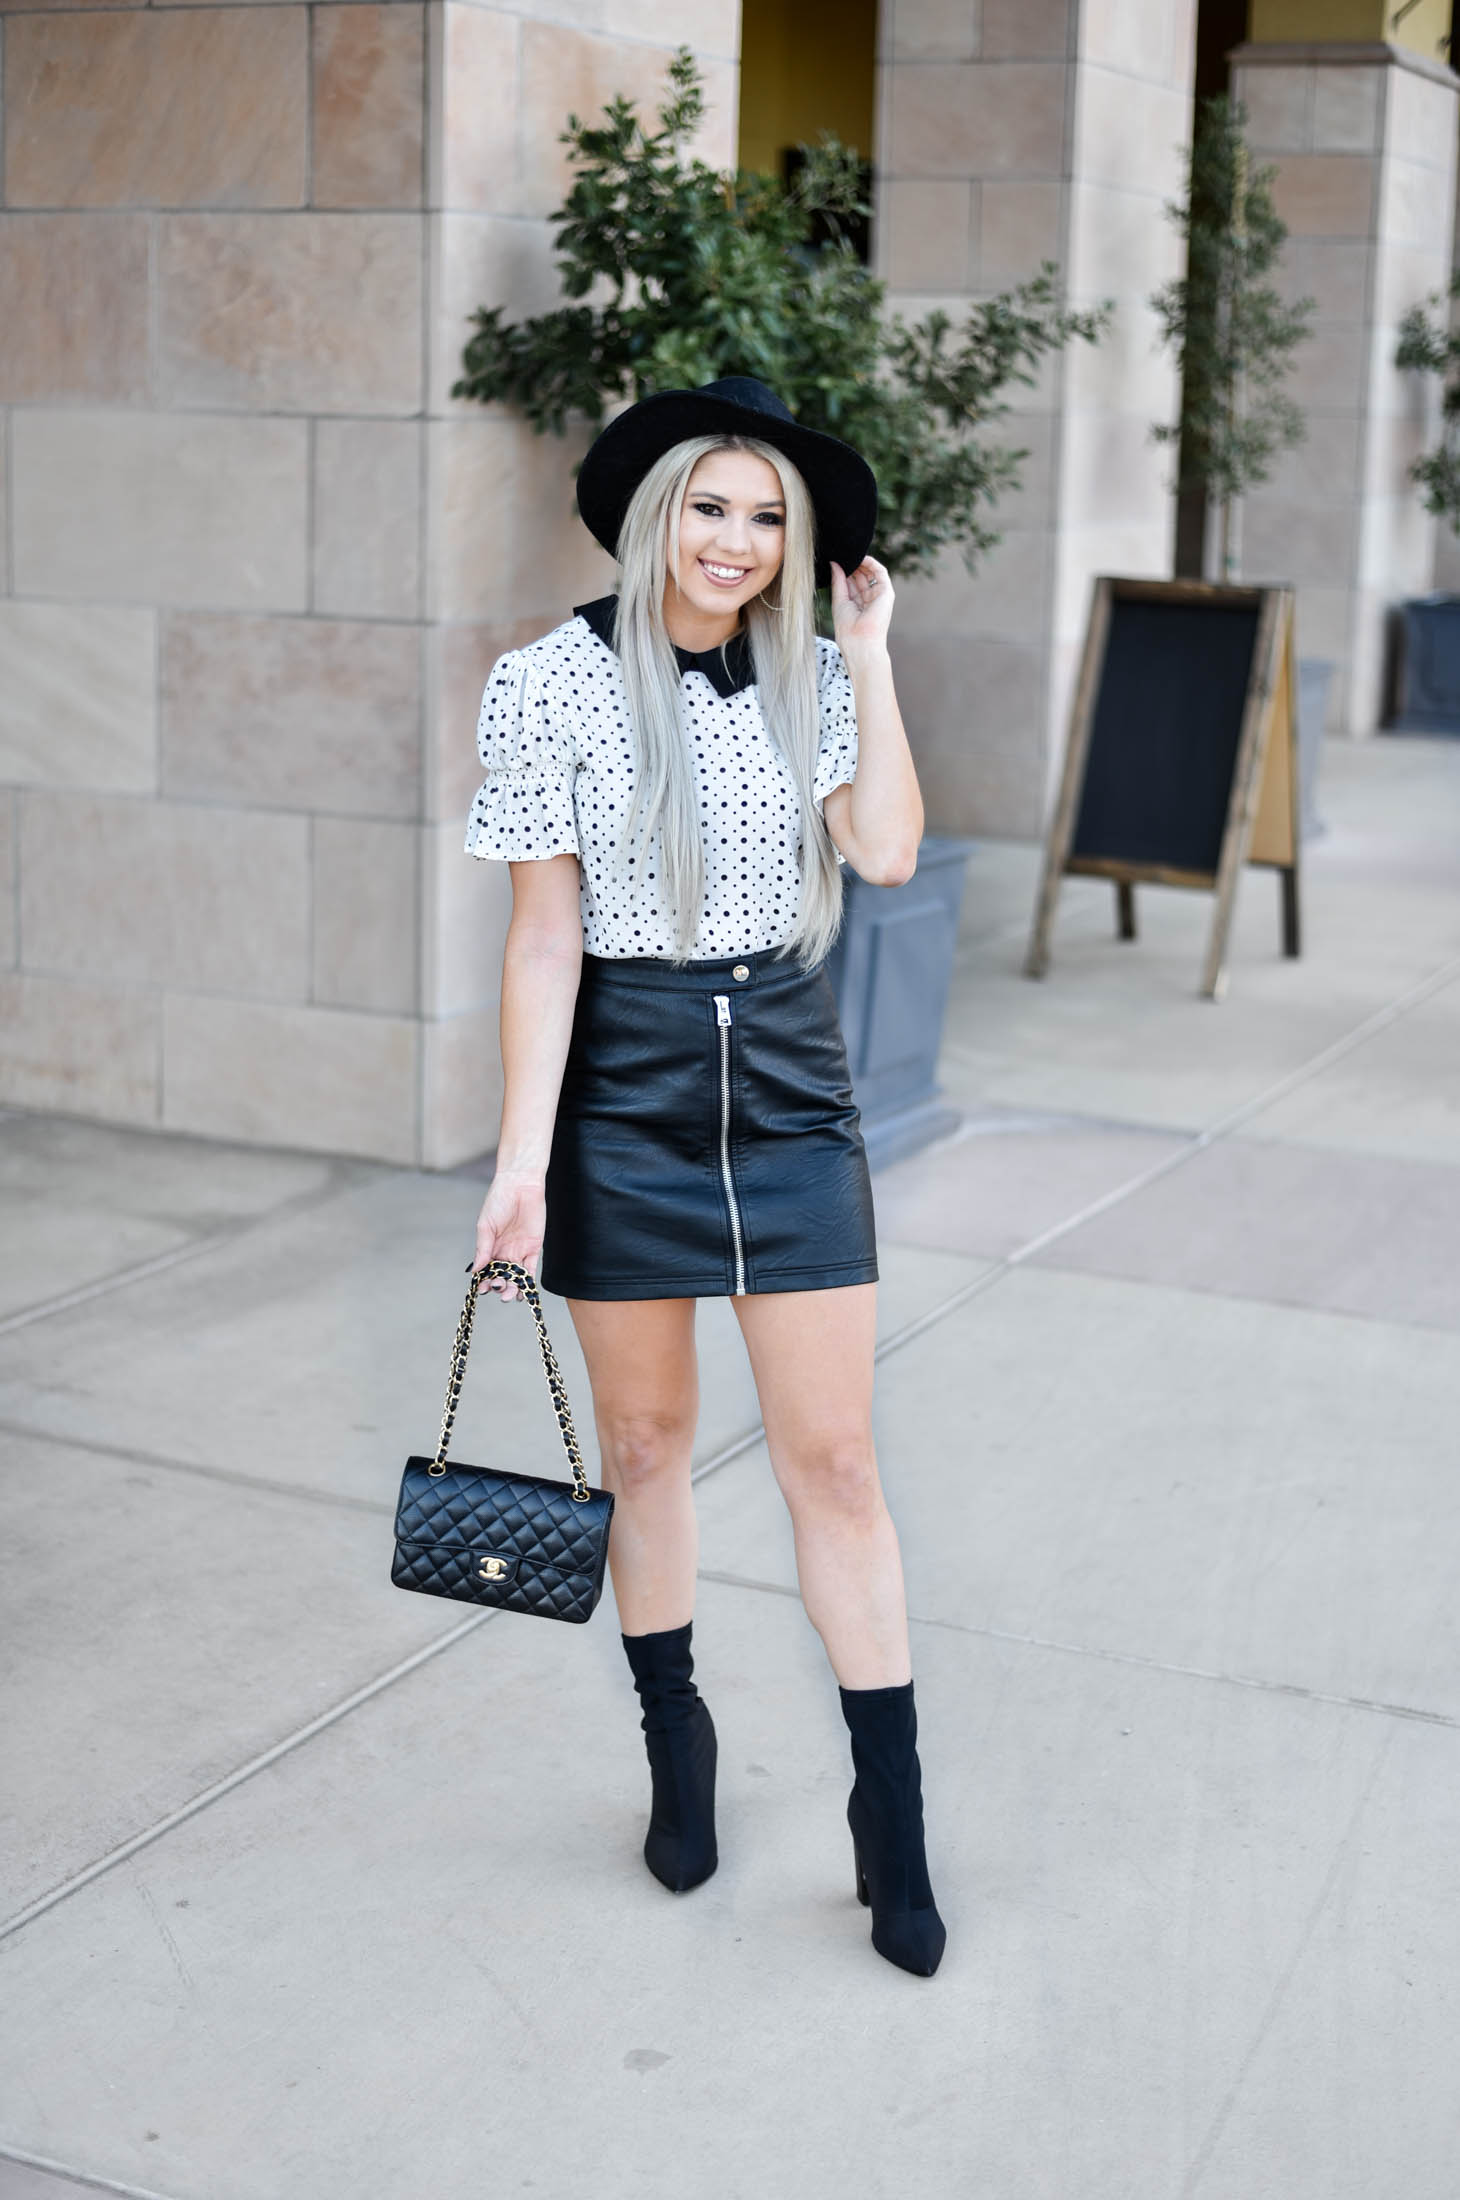 Erin Elizabeth of Wink and a Twirl shares the cutest CeCe Sportswear polka dot top and leather mini 